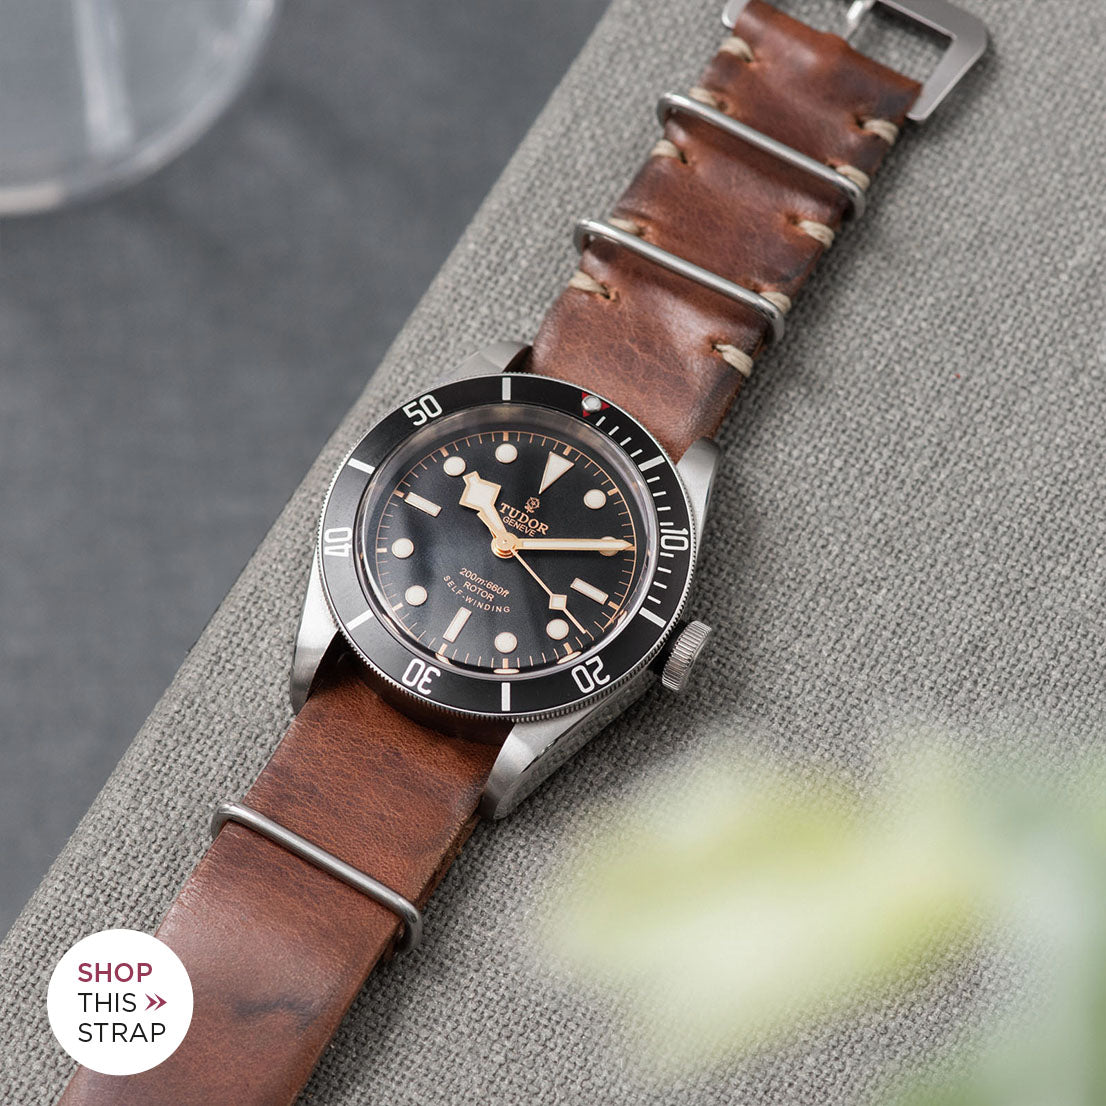 Bulang and Sons_Strap Guide_The Tudor Black Bay Black 79220N_Siena Brown Nato Leather Watch Strap